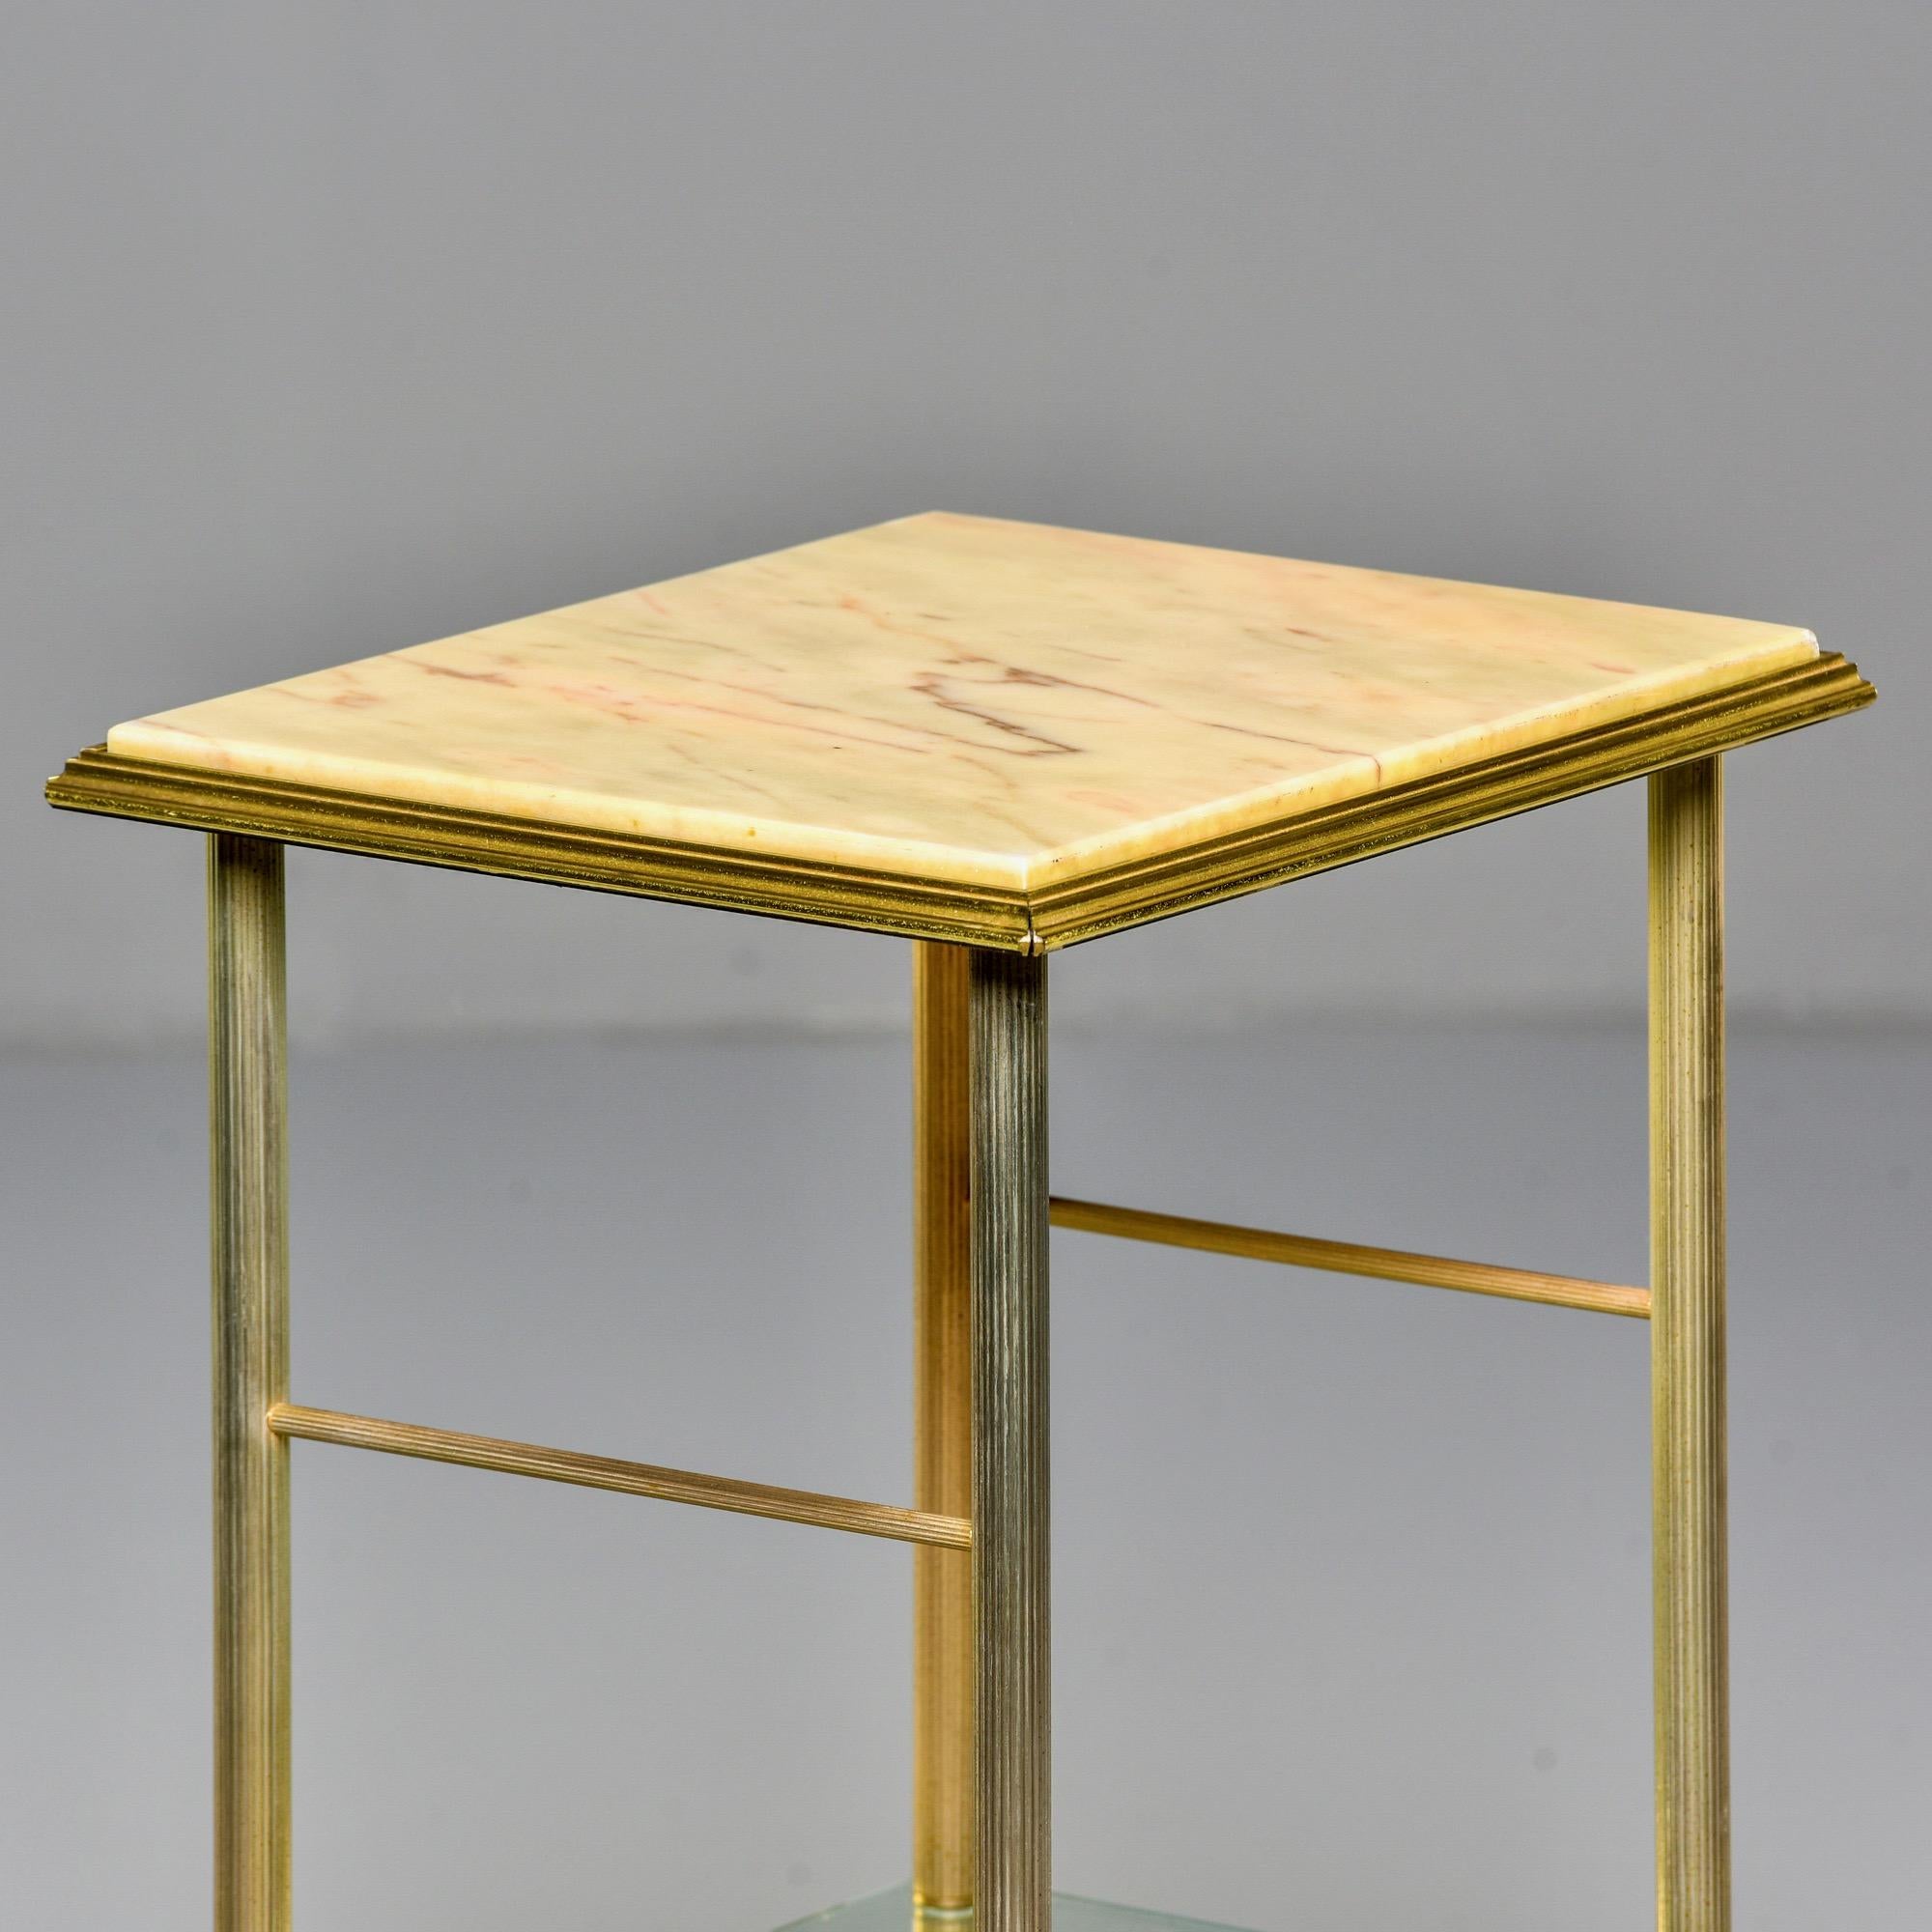 Onyx and brass side table with lower tier glass shelf and reeded legs, circa 1940s. Acquired from a very experienced and reputable French dealer who confidently attributes this piece to Maison Jansen.
         